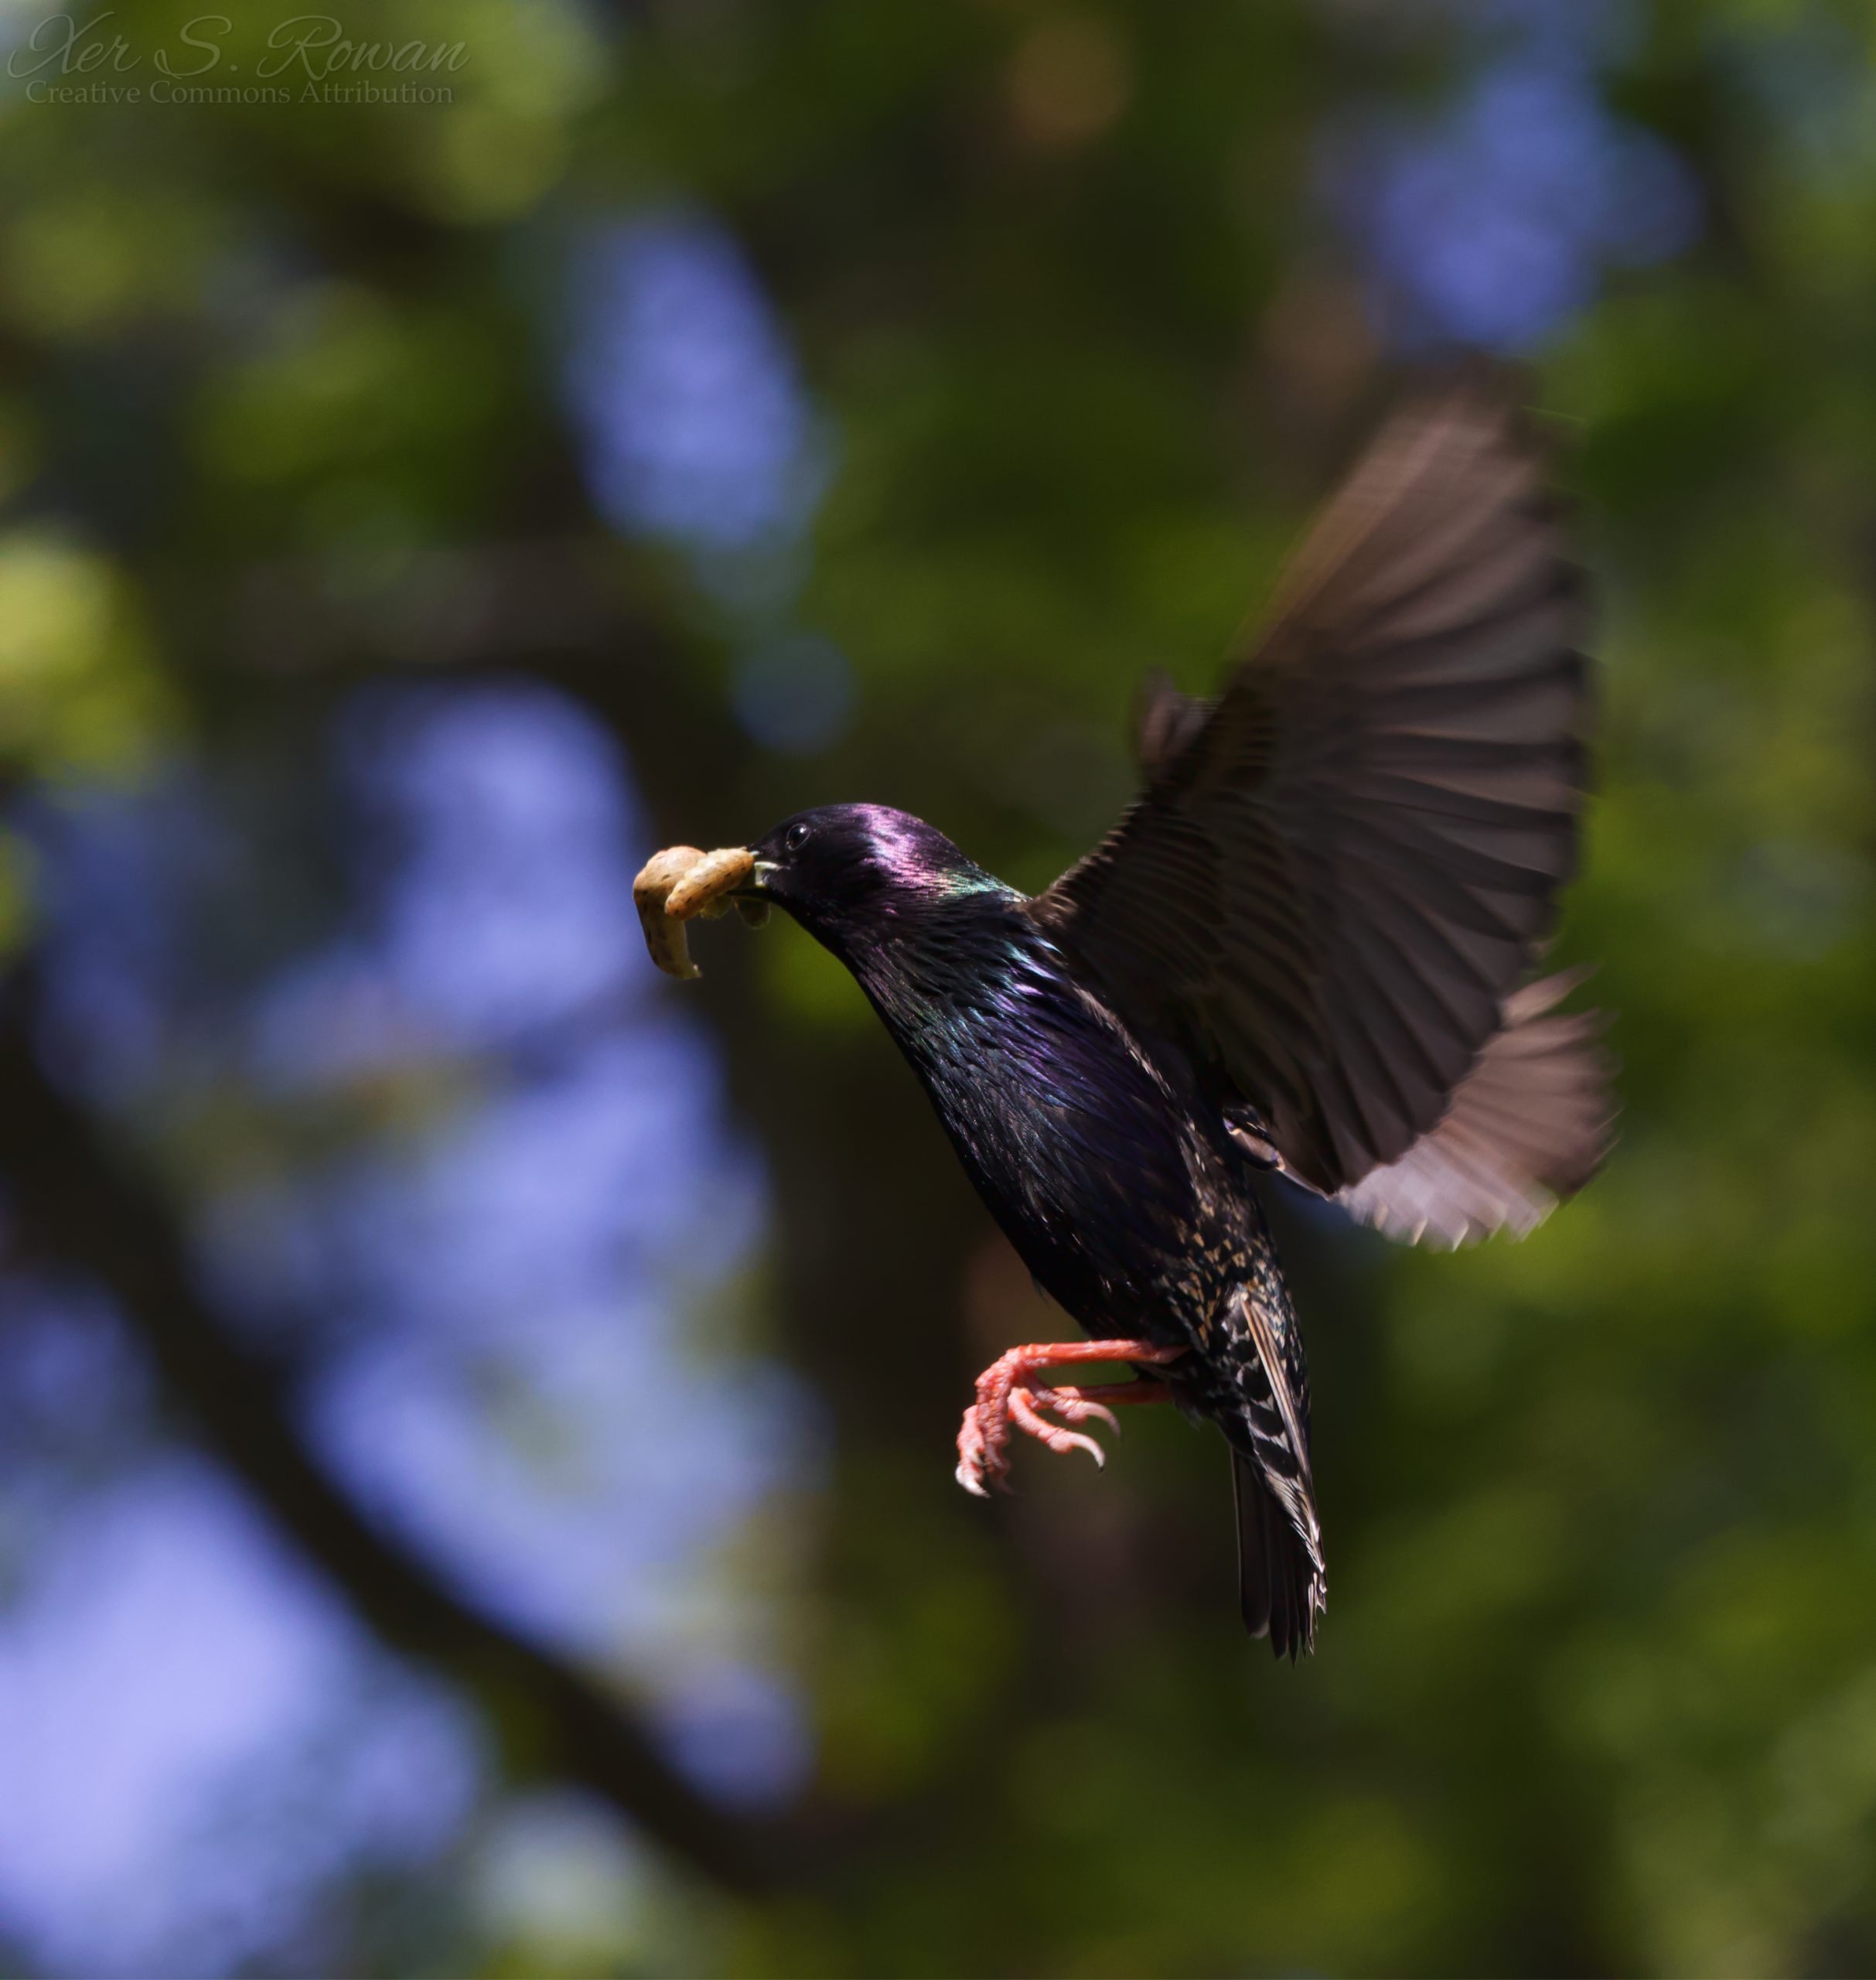 starling in flight with a caterpillar in its beak